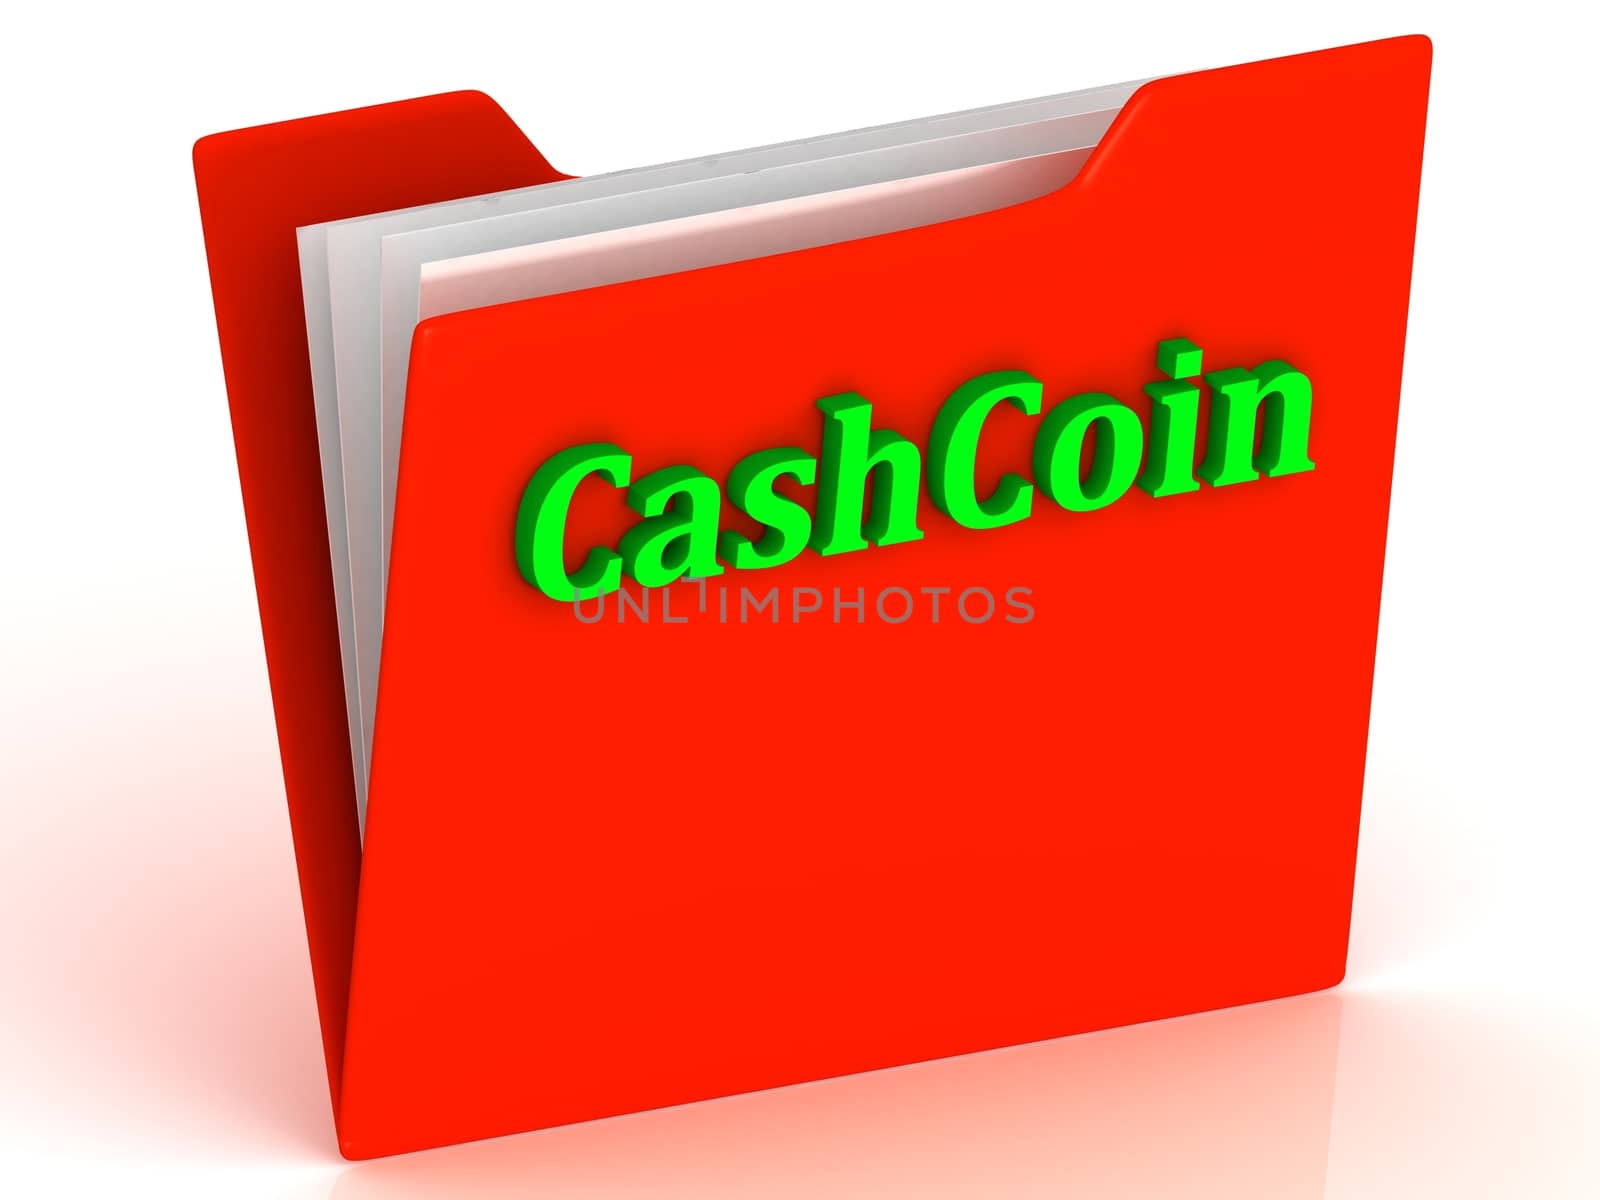 CashCoin - bright green letters on a gold folder on a white background